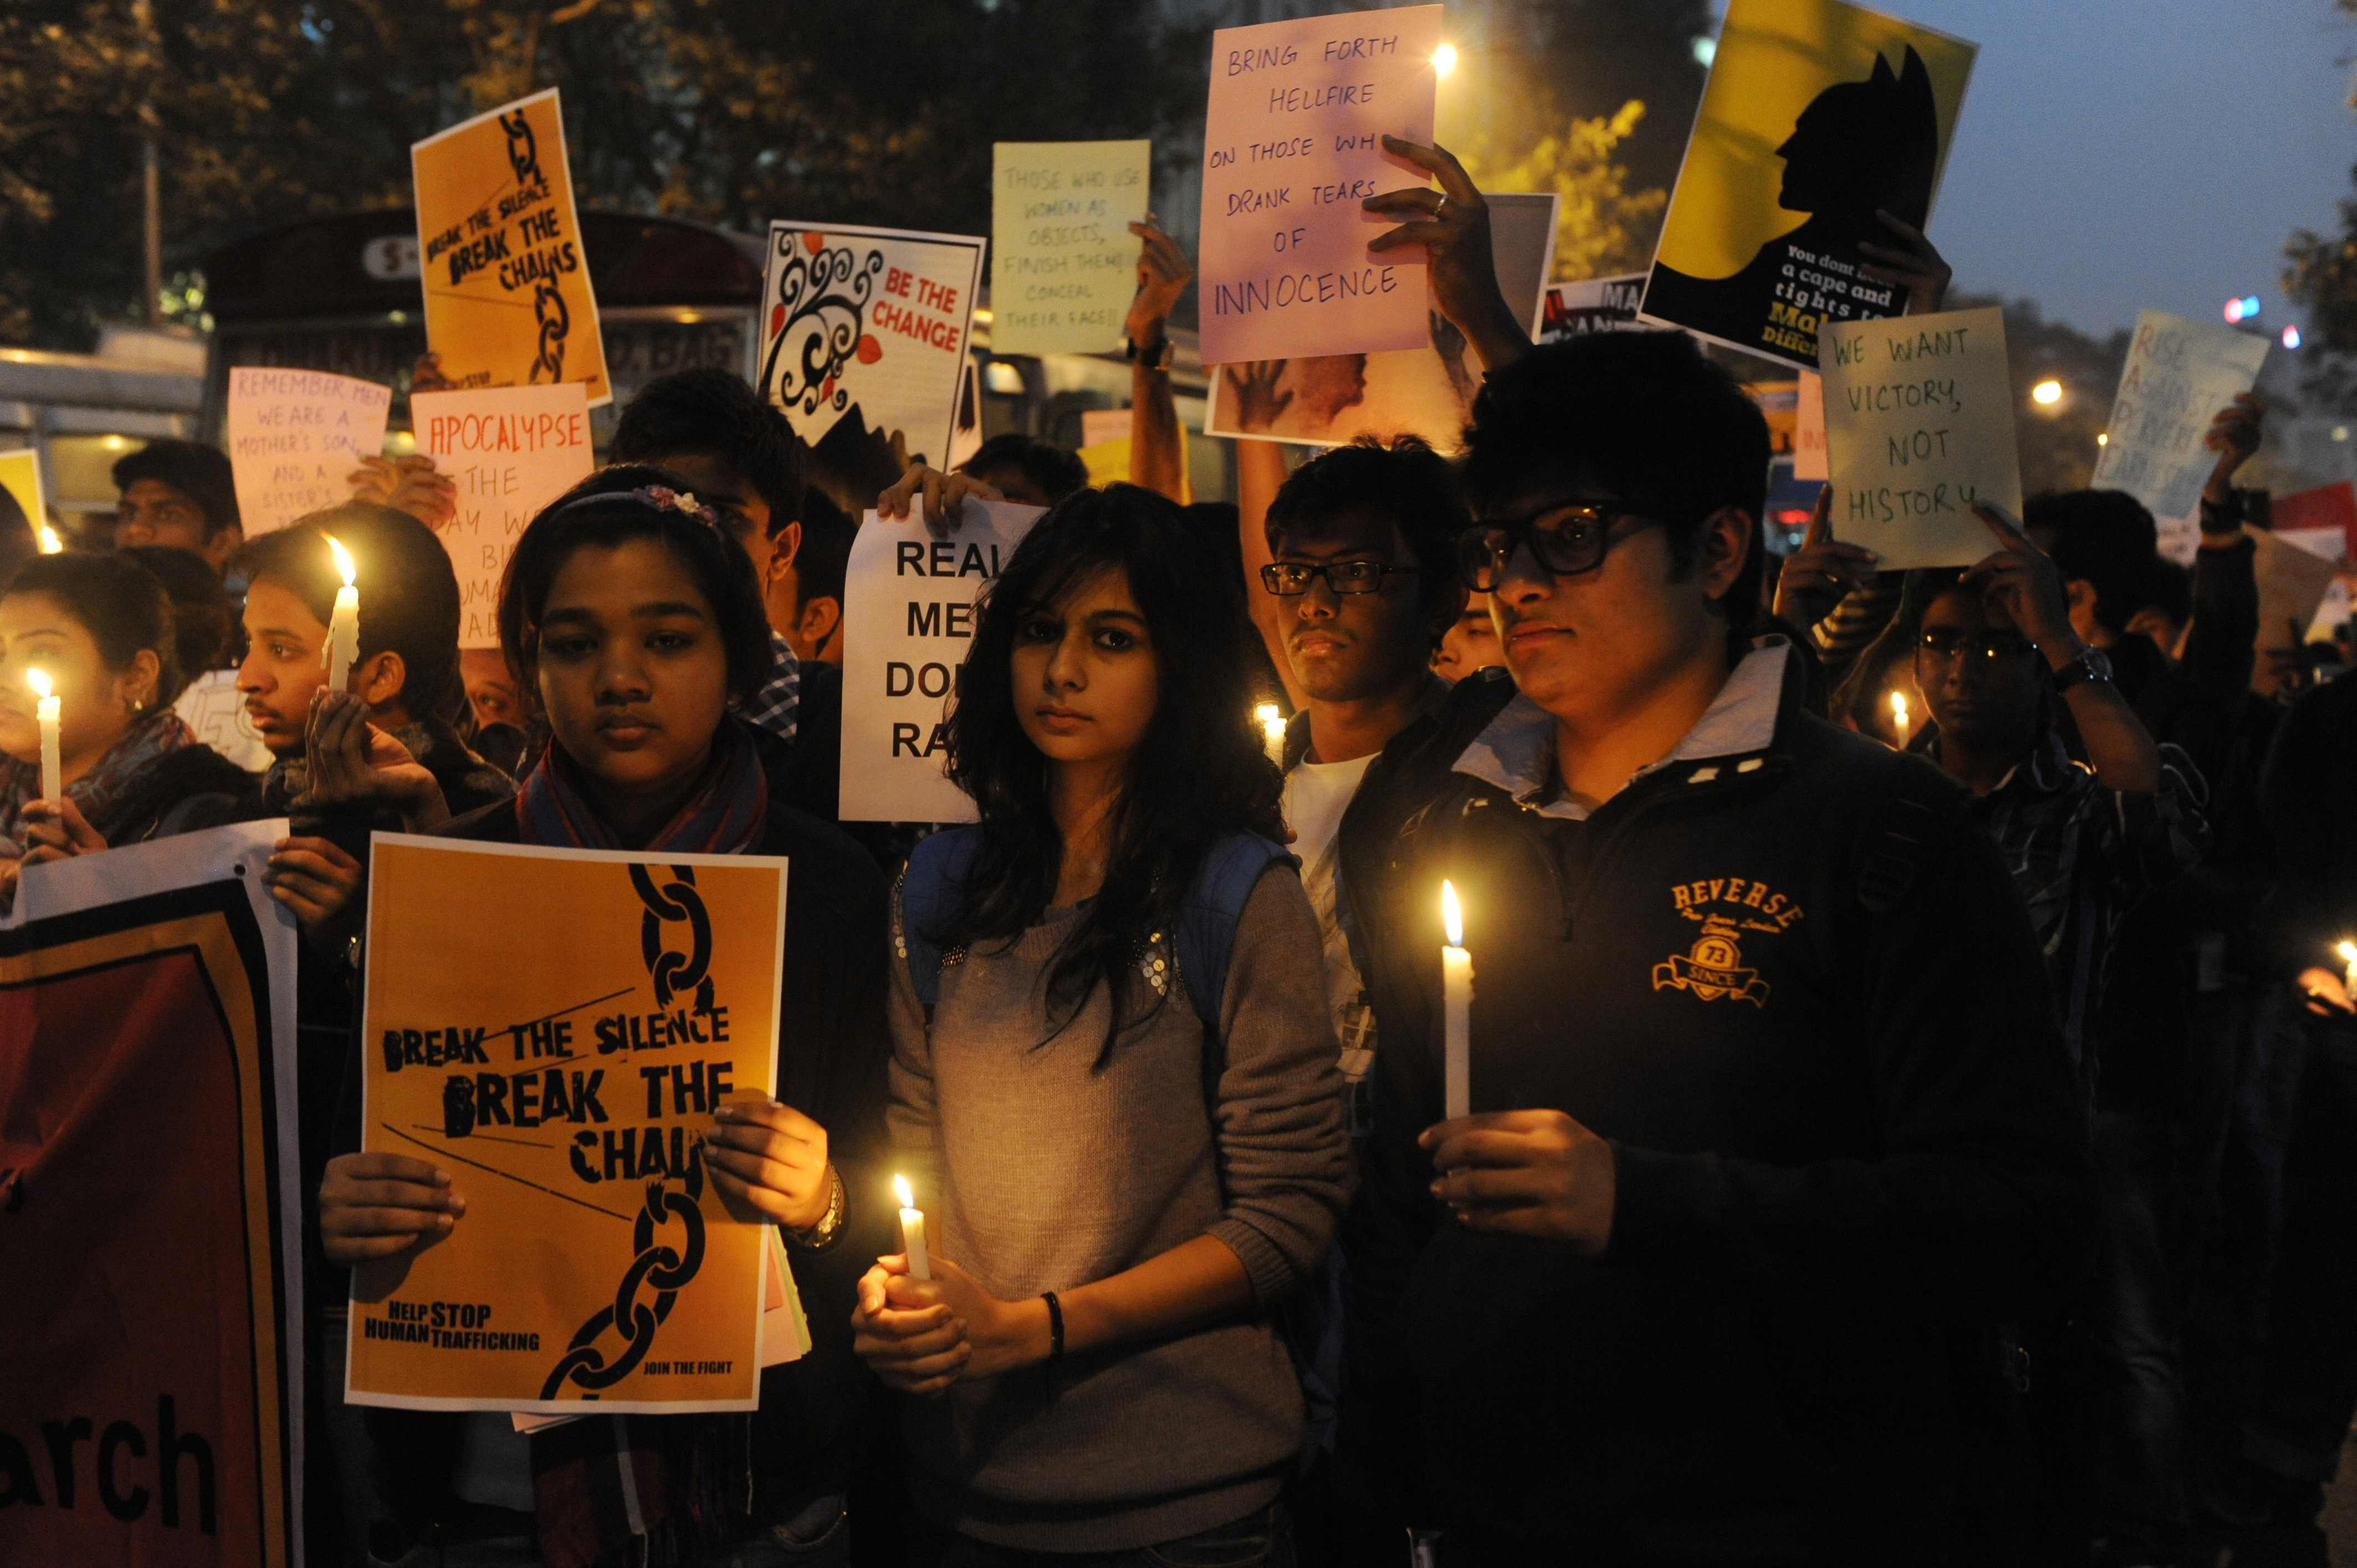 Students rally in Kolkata on December 29, 2012, after the gang rape of a 23-year-old woman in Delhi horrified the nation